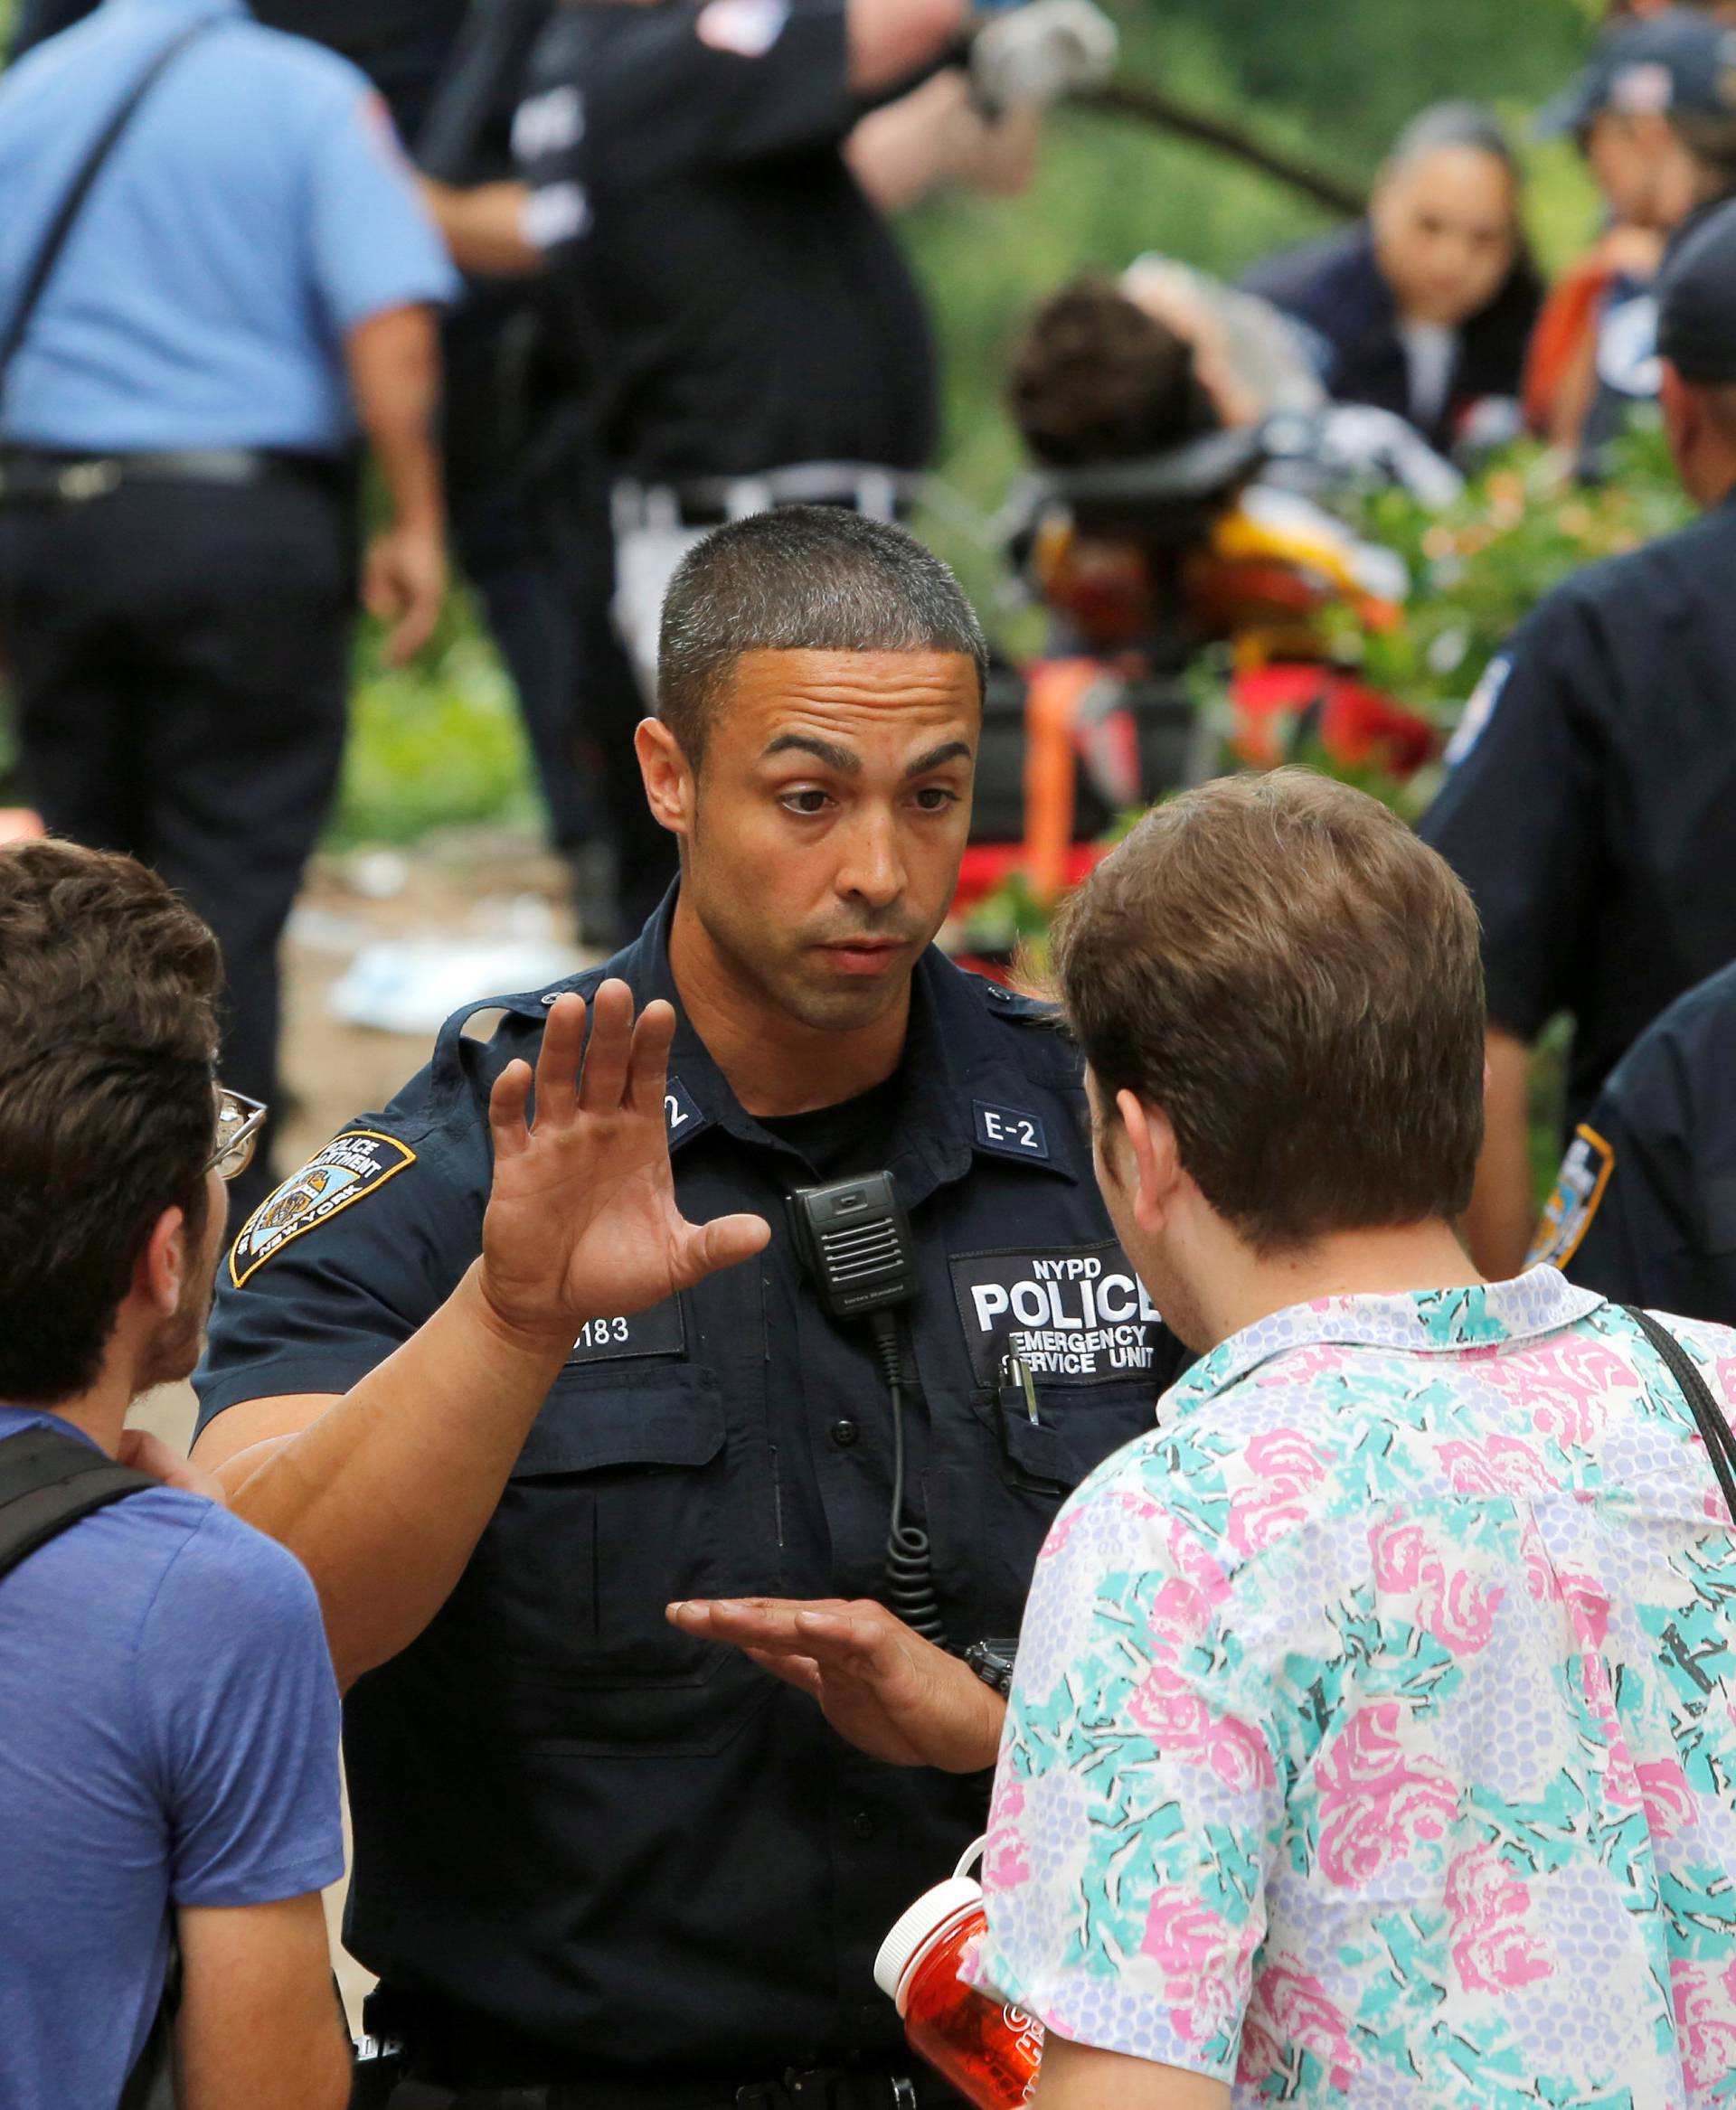 Police speak to people at the scene where a man was injured after an explosion in Central Park in Manhattan, New York